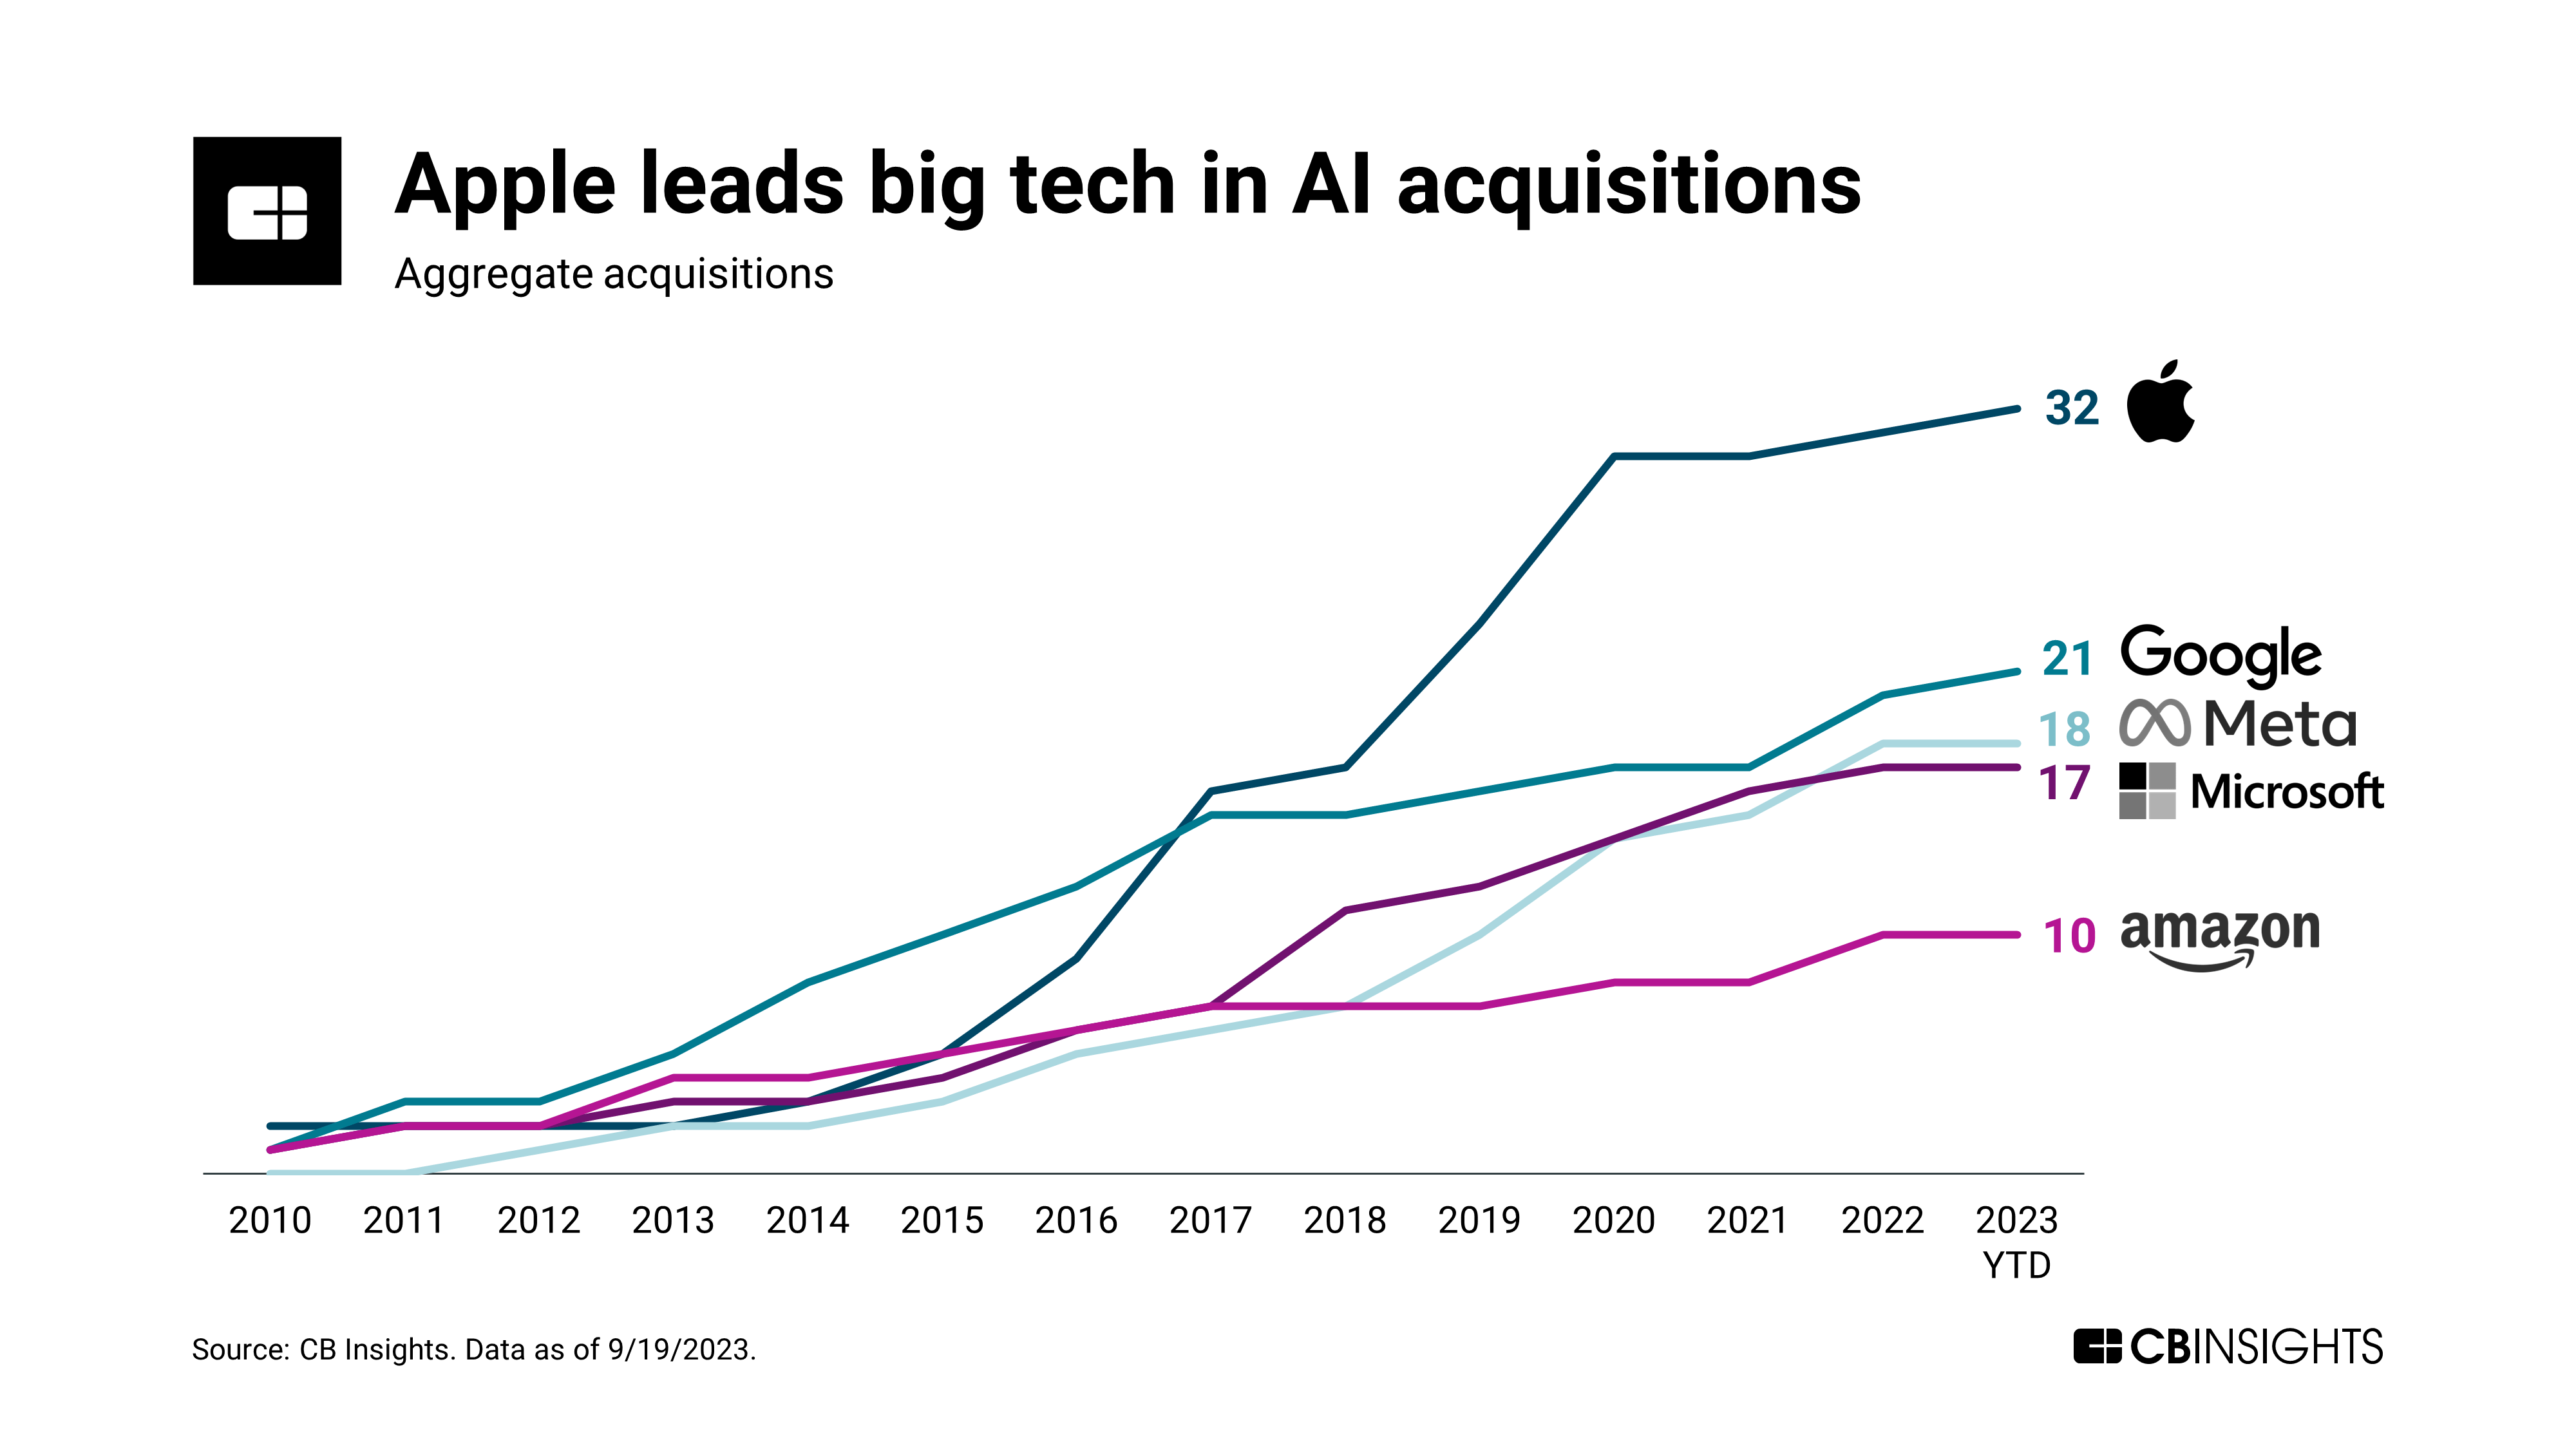 The Big Tech Company leading in AI acquisitions